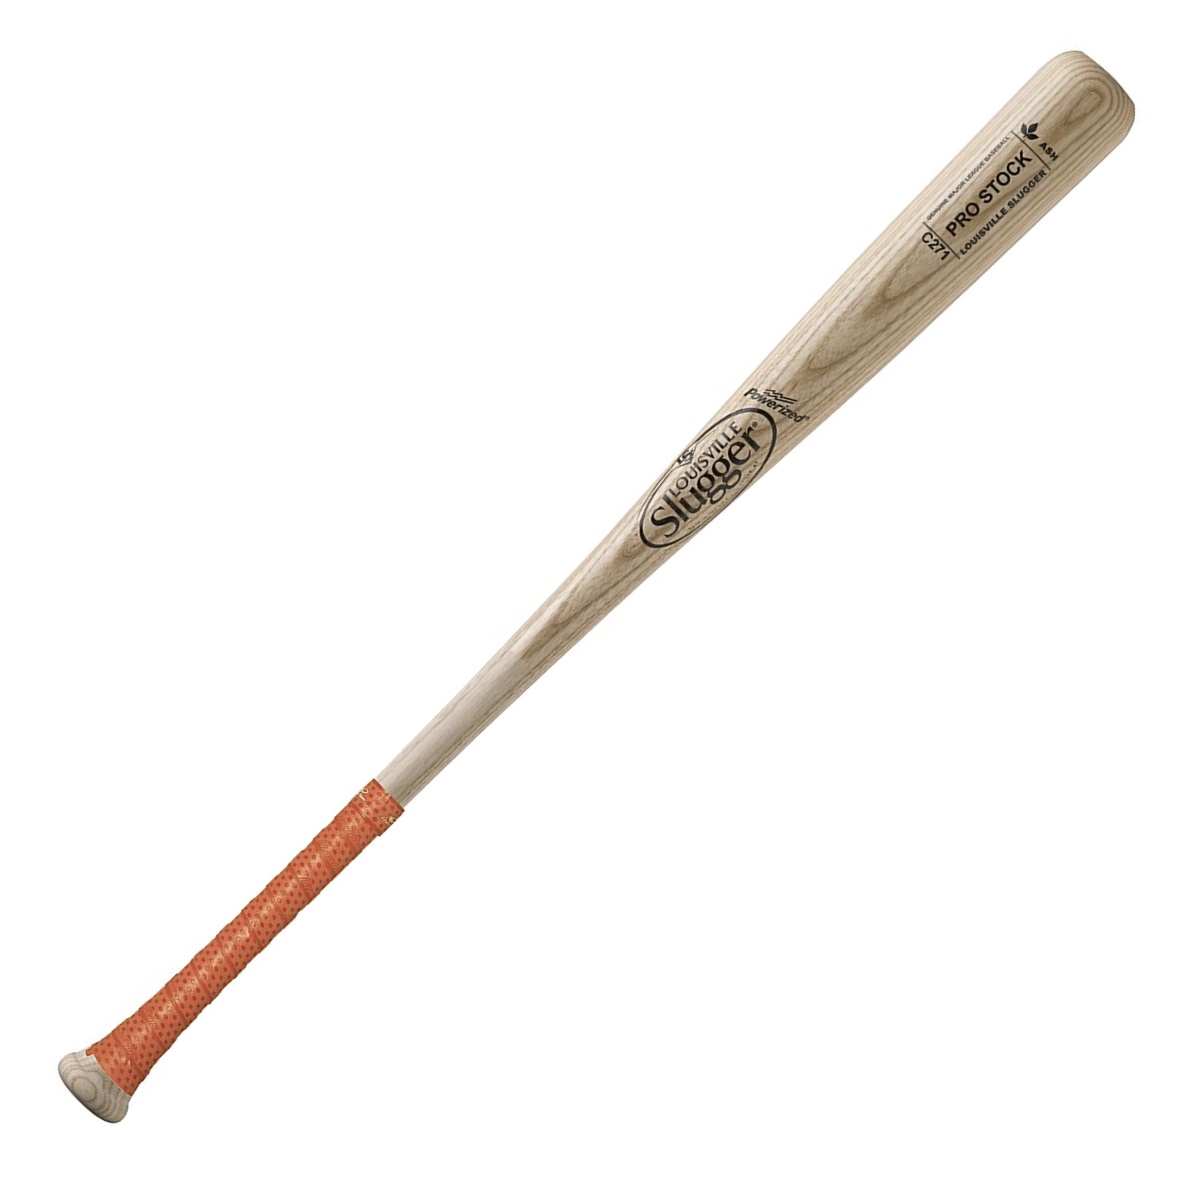 The Louisville Slugger Pro Stock Wood Bat Series is made from Northern White Ash, the most common and dependable wood on the market. The bat's medium barrel and Pro Cupped end give it a greater hitting zone and balanced swing weight for a quicker, more powerful swing. The Louisville Slugger Pro Stock Wood Bat Series is ideal for high school, college, adult senior league and minor league professional baseball practice on wood, and save your high-dollar metal bats for the game. Wood: #1 Grade Ash Finish: Natural Turning Model: C271 Cupped: Yes Grip: Orange Lizard Skins.